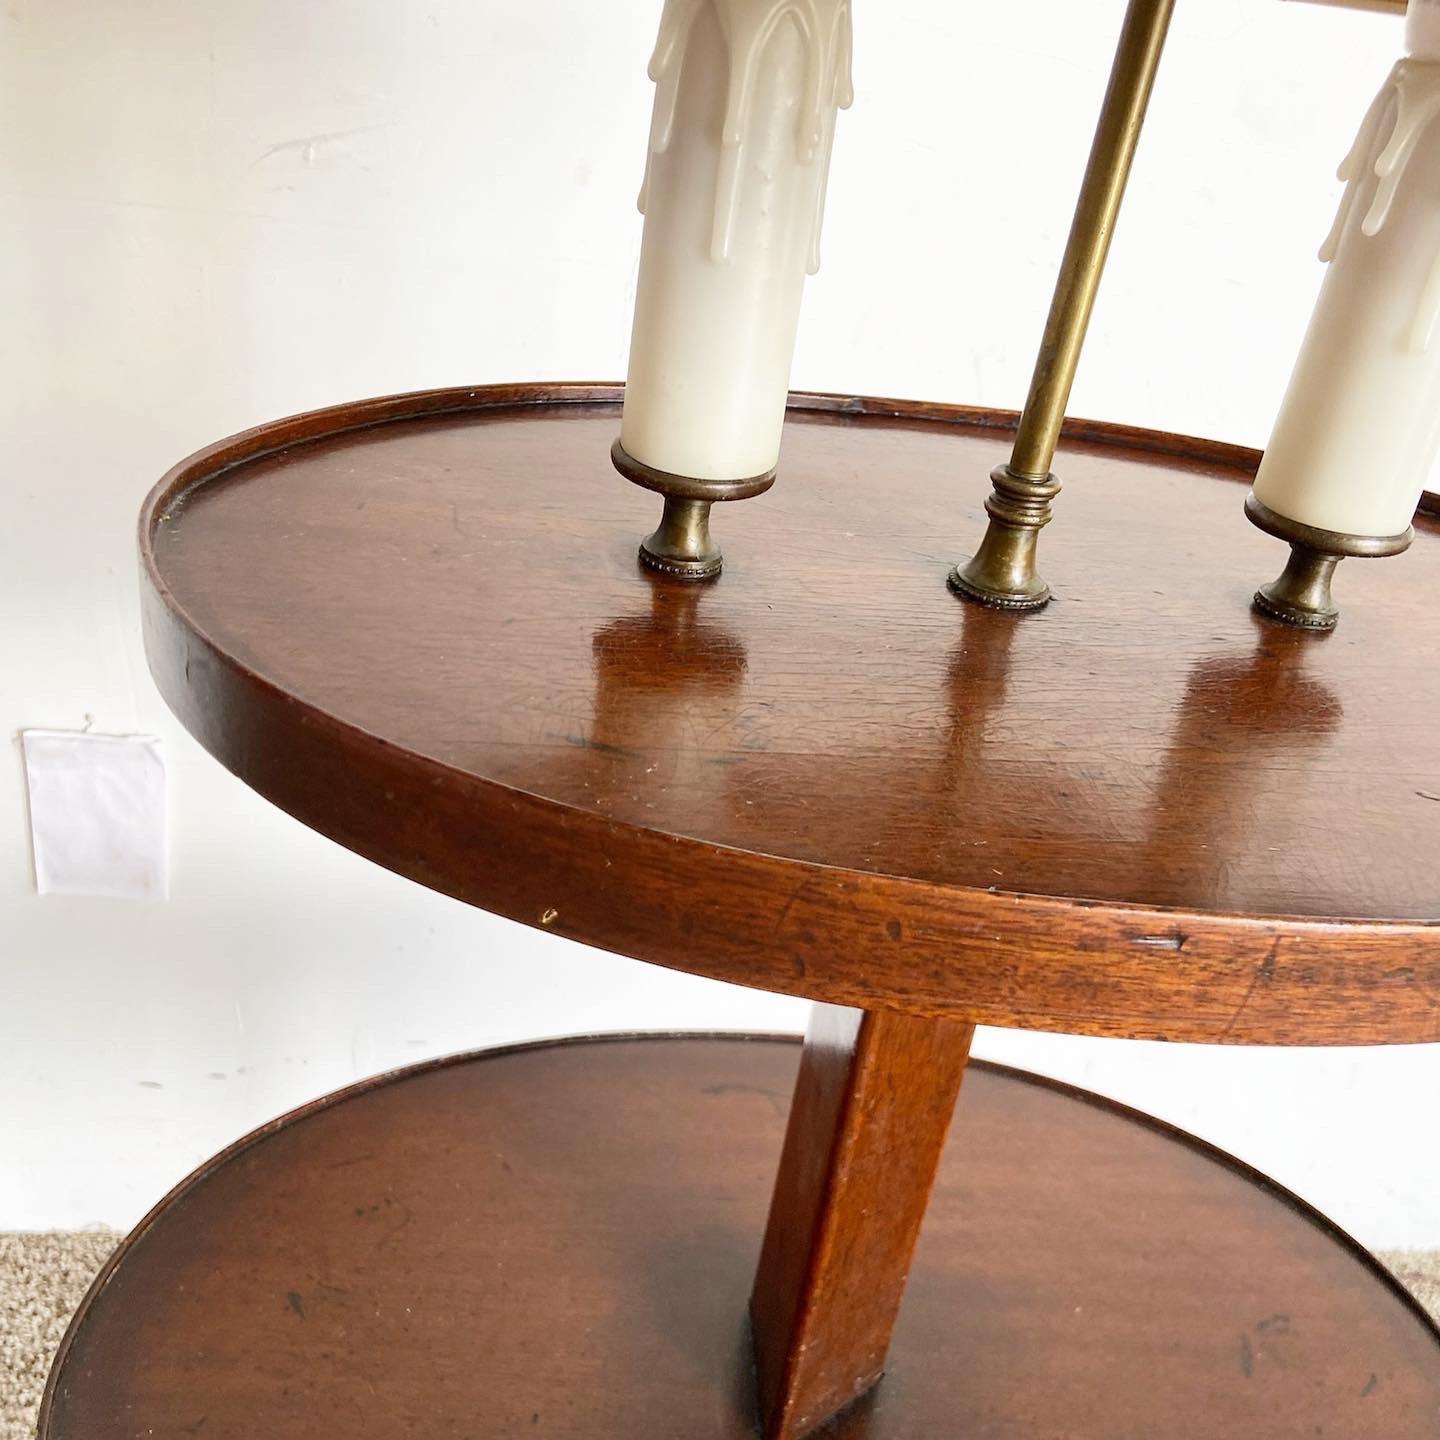 British Colonial Antique Faux Candle Floor Lamp Side Table For Sale